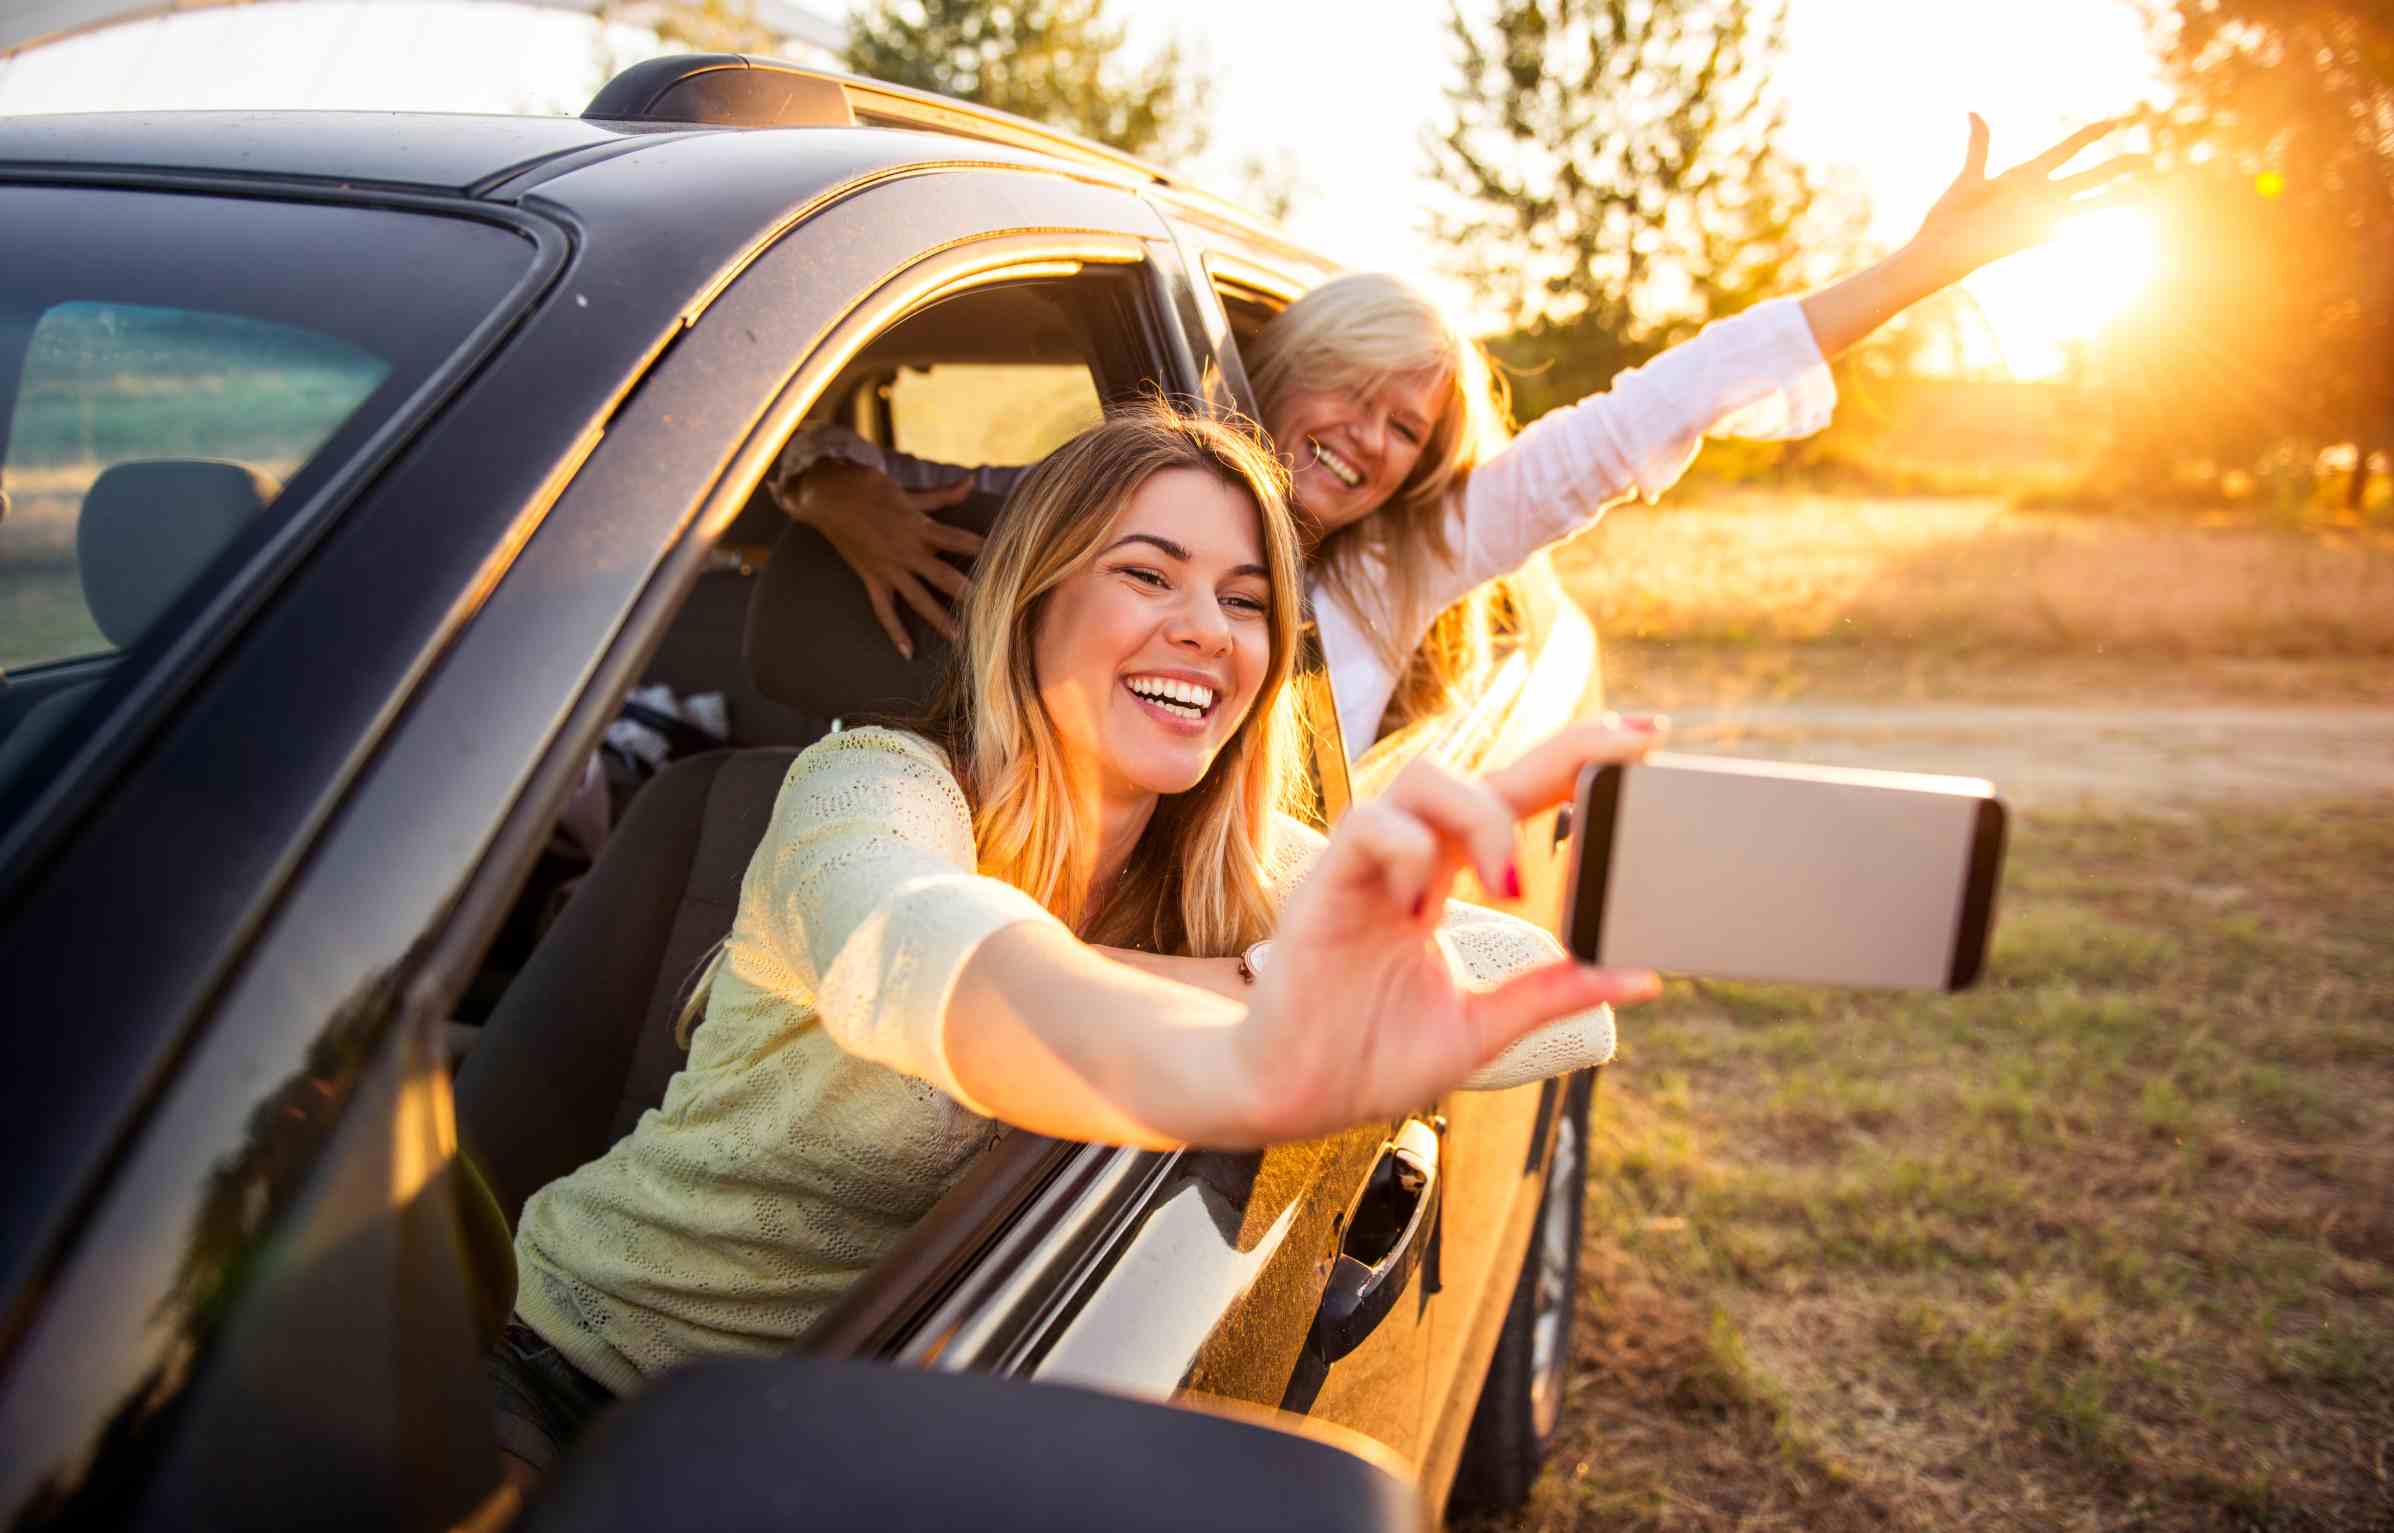 Big Family Vacation: 7 Tips for an Epic Road Trip